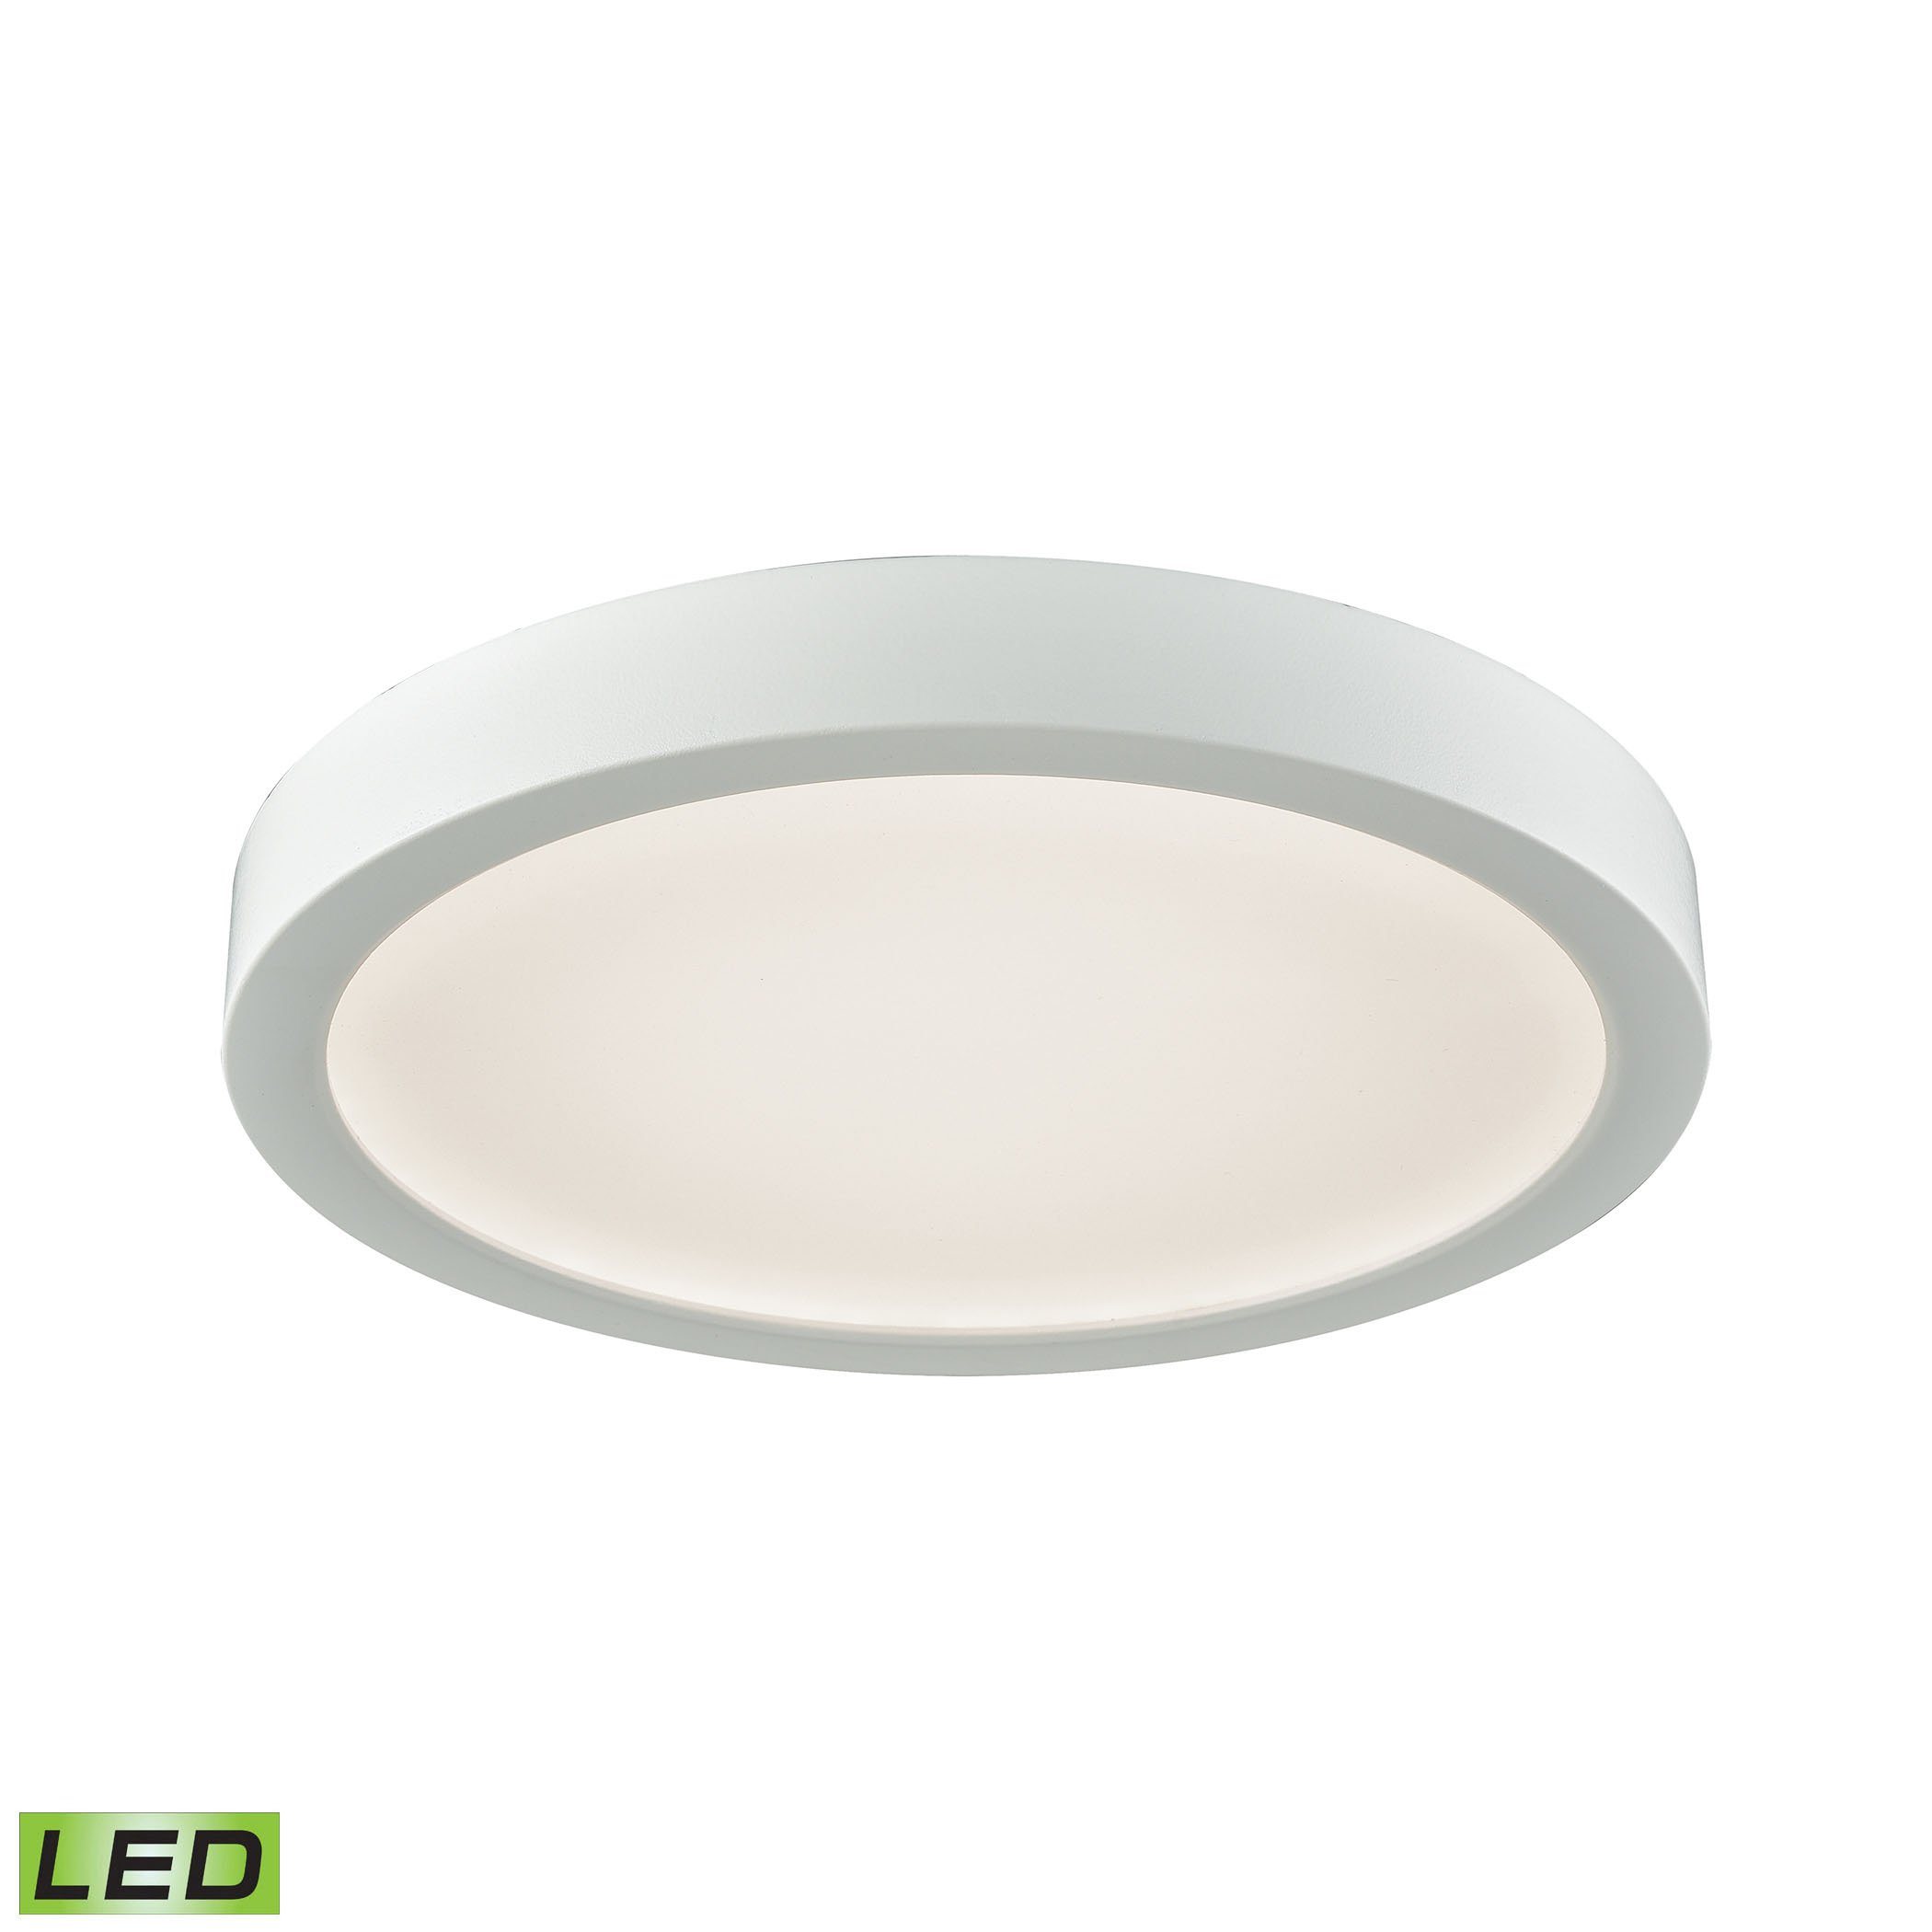 Titan 1-Light 8-inch LED Flush Mount in White with a White Acrylic Diffuser Ceiling Thomas Lighting 